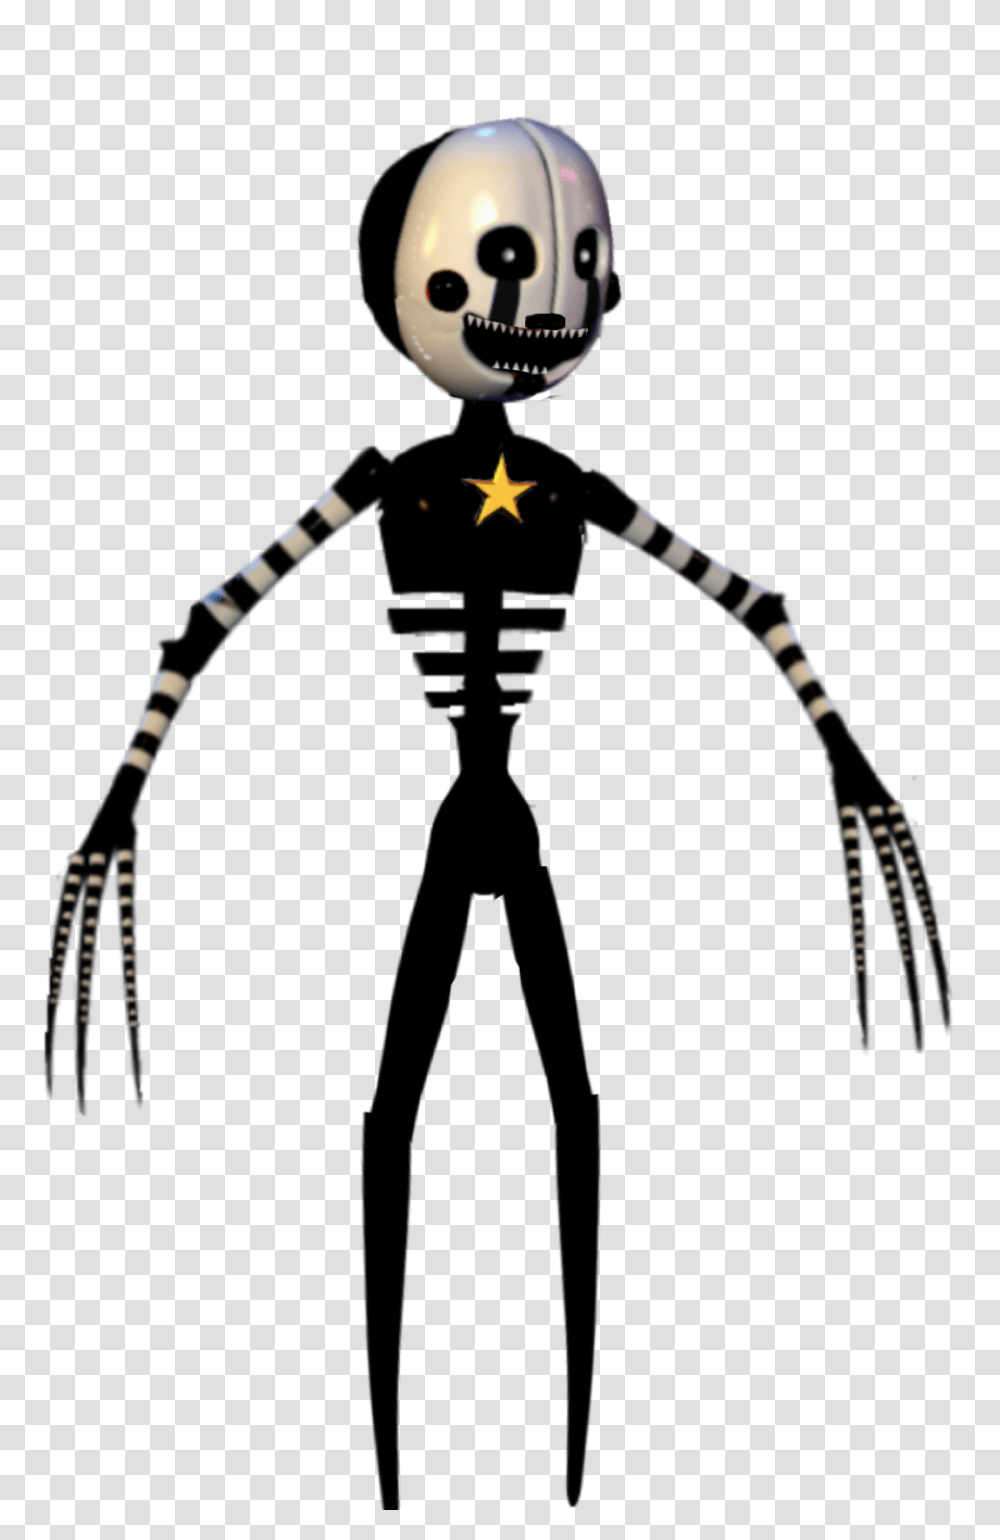 Awesome Nightmarionne Images, Animal, Leisure Activities Transparent Png